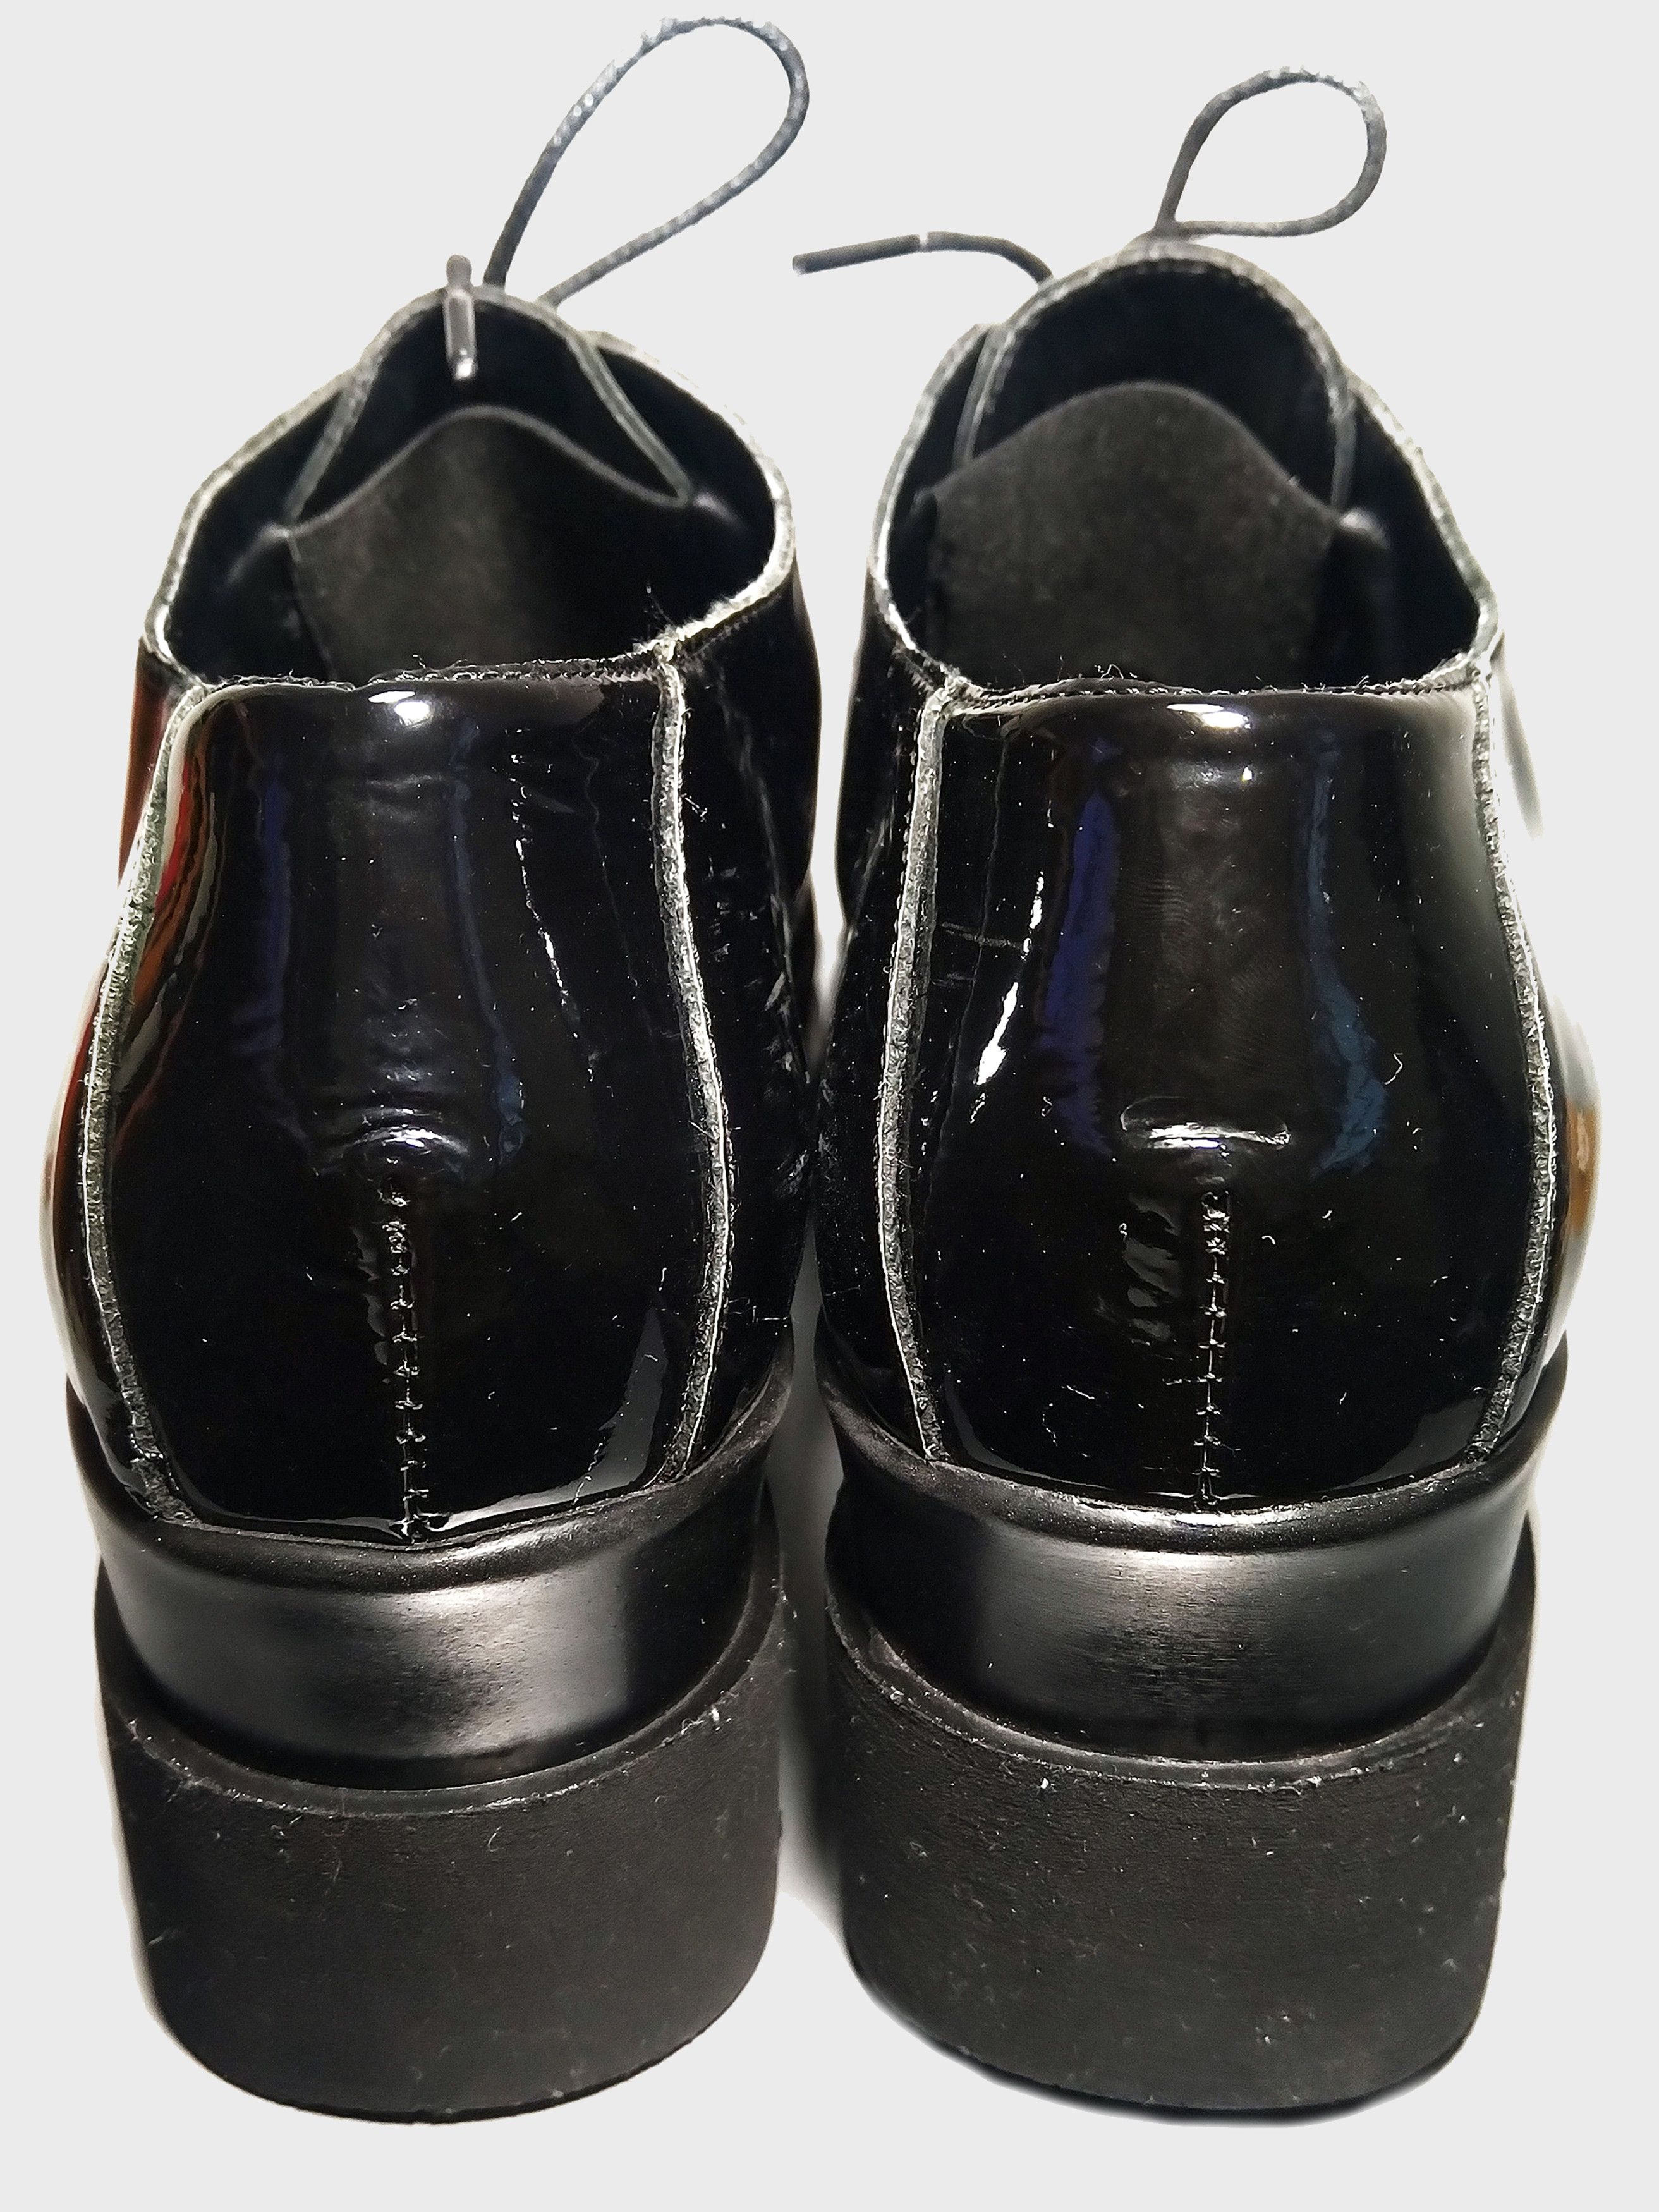 Vera Pelle Cw chewing black patent Italian leather low shoes Size US 8 / IT 38 - 7 Thumbnail